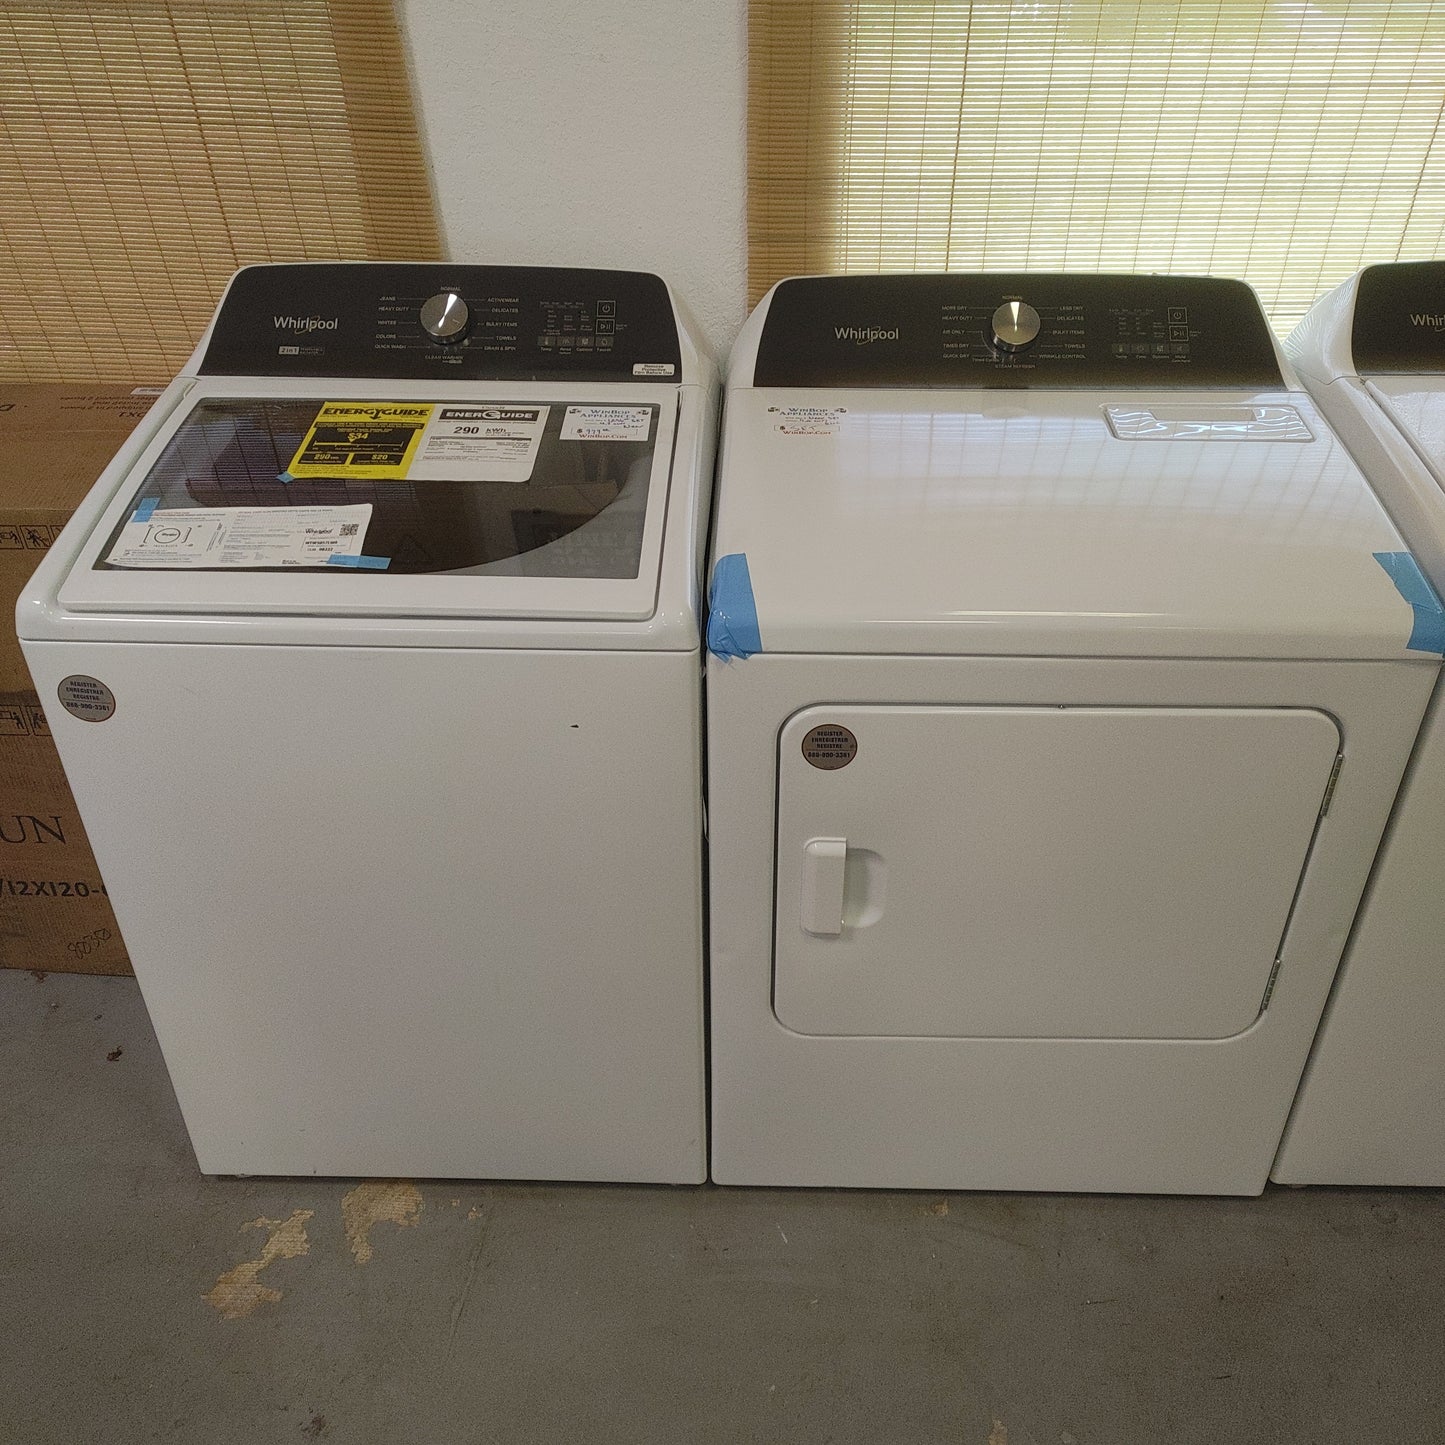 New Whirlpool 4.7 Top Load Washer and 7.0 Electric Dryer set